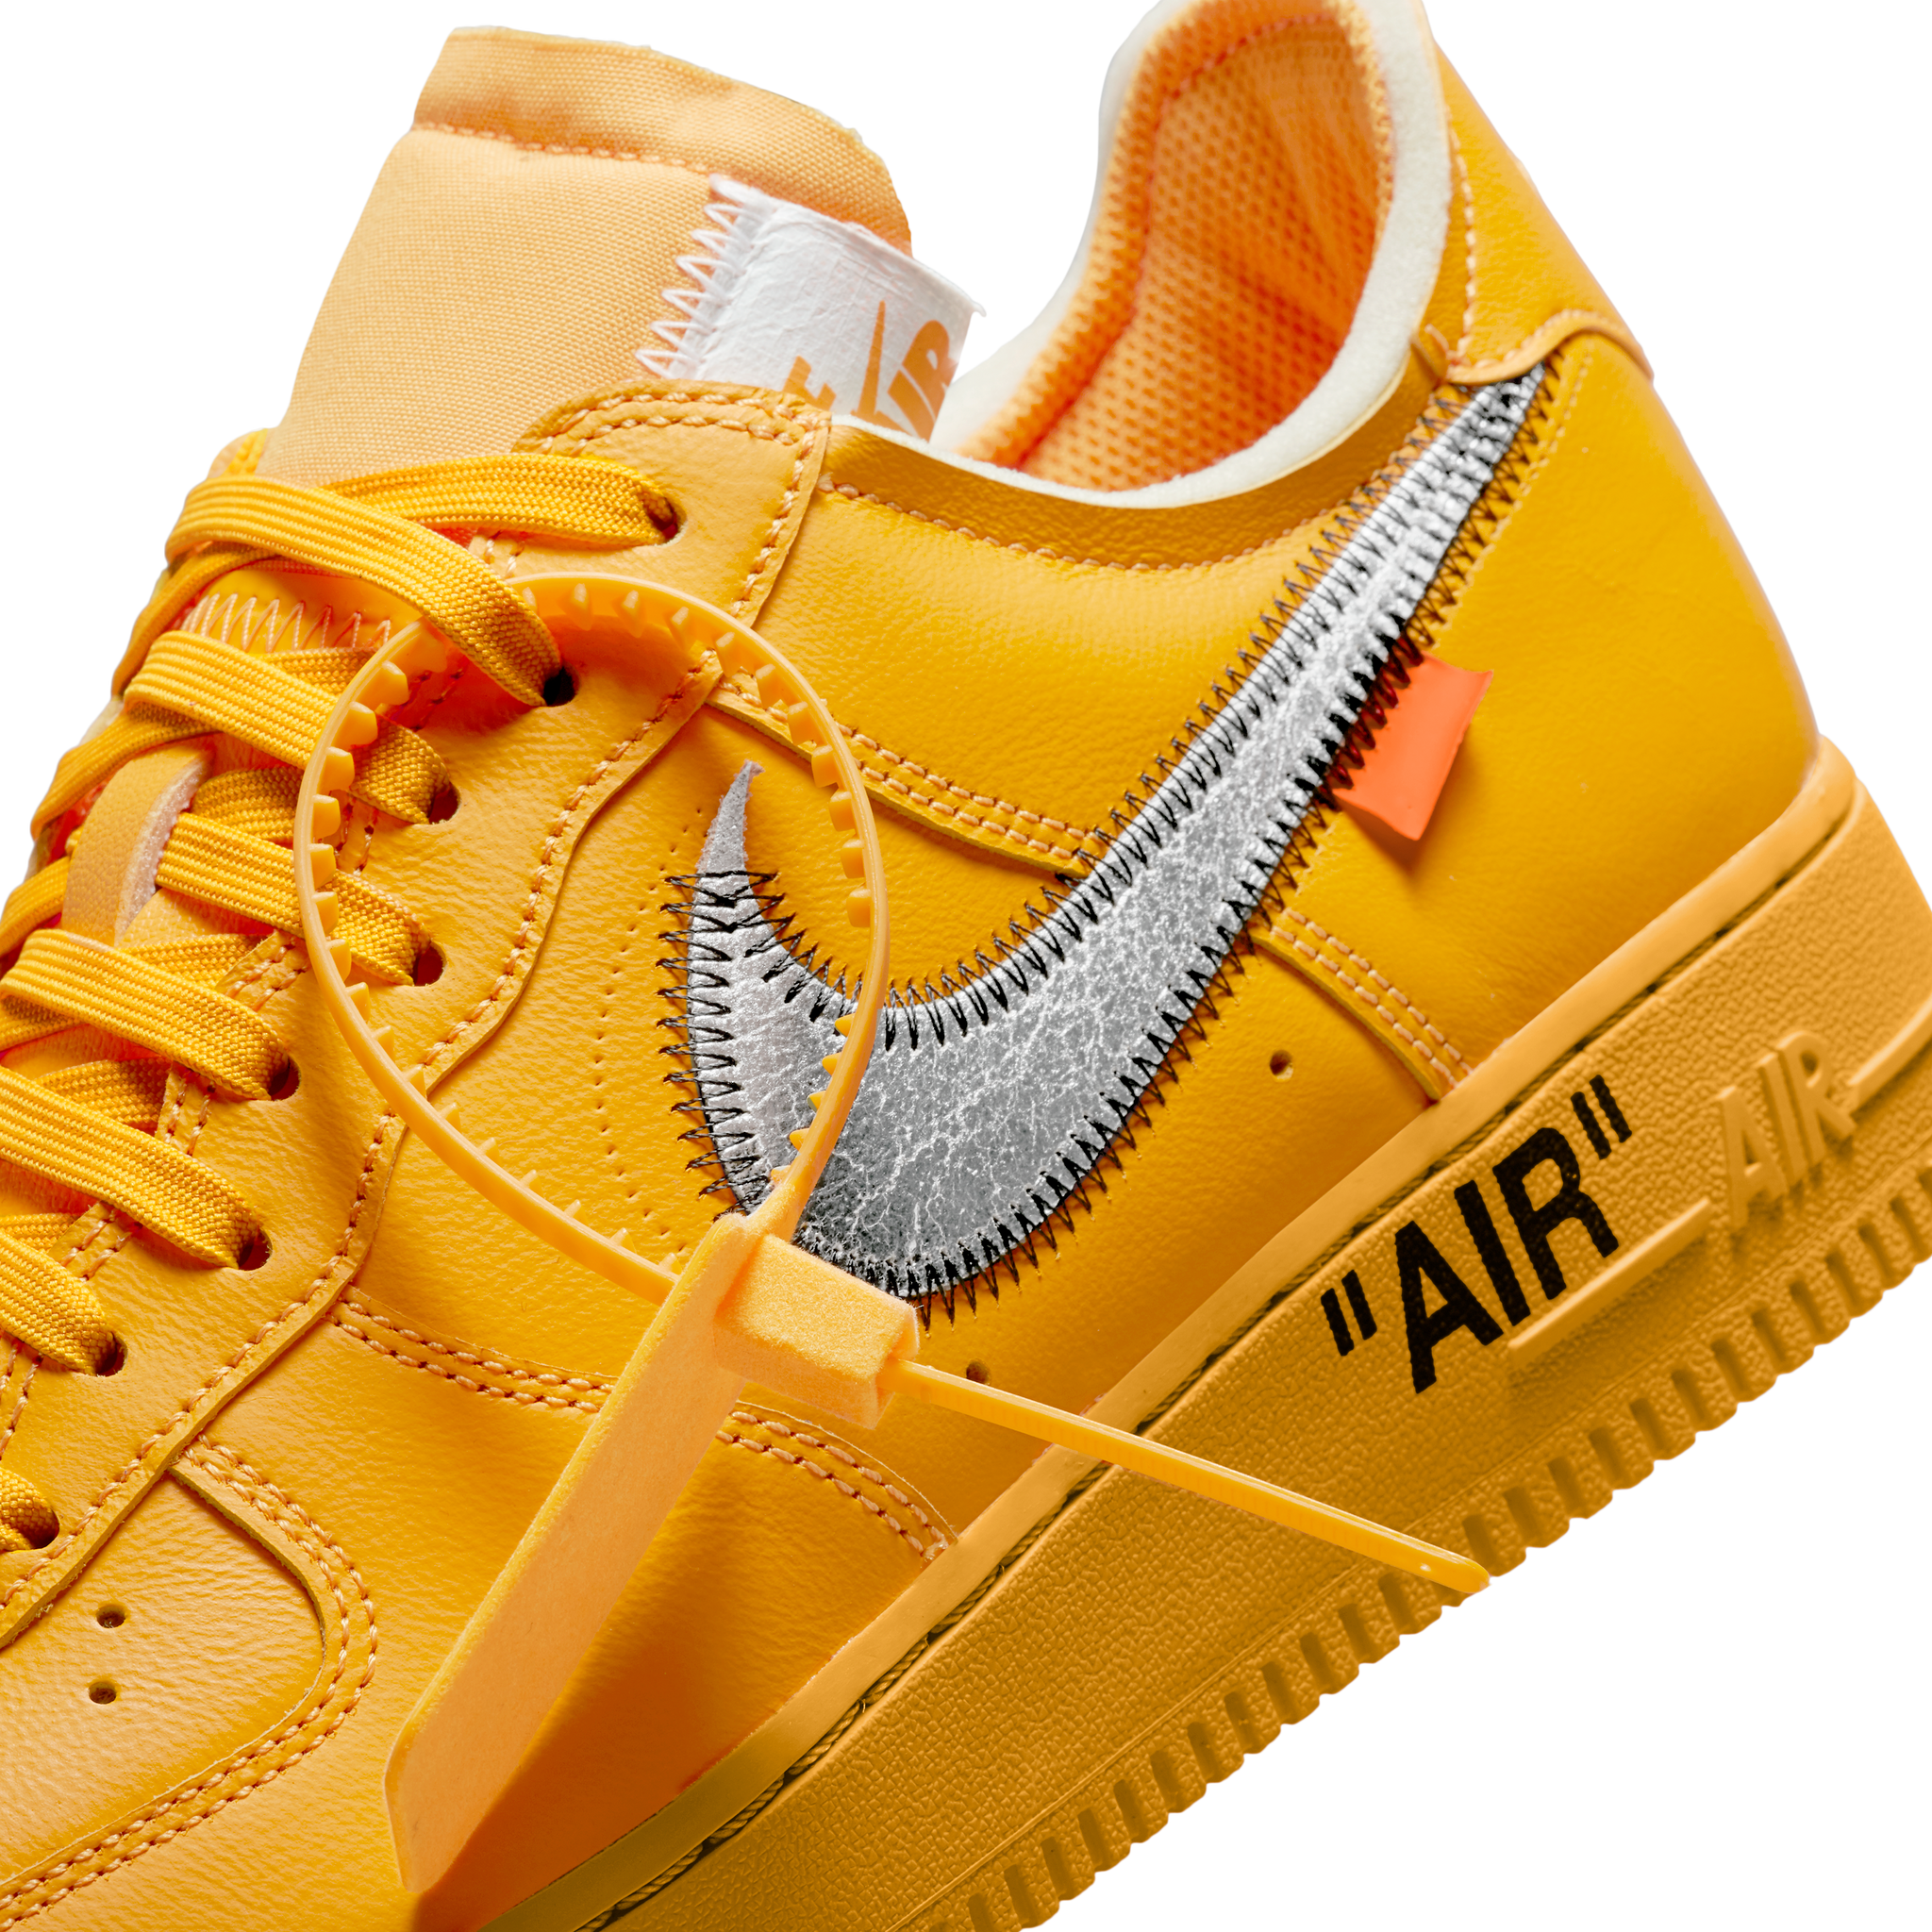 air force 1 off white jaune